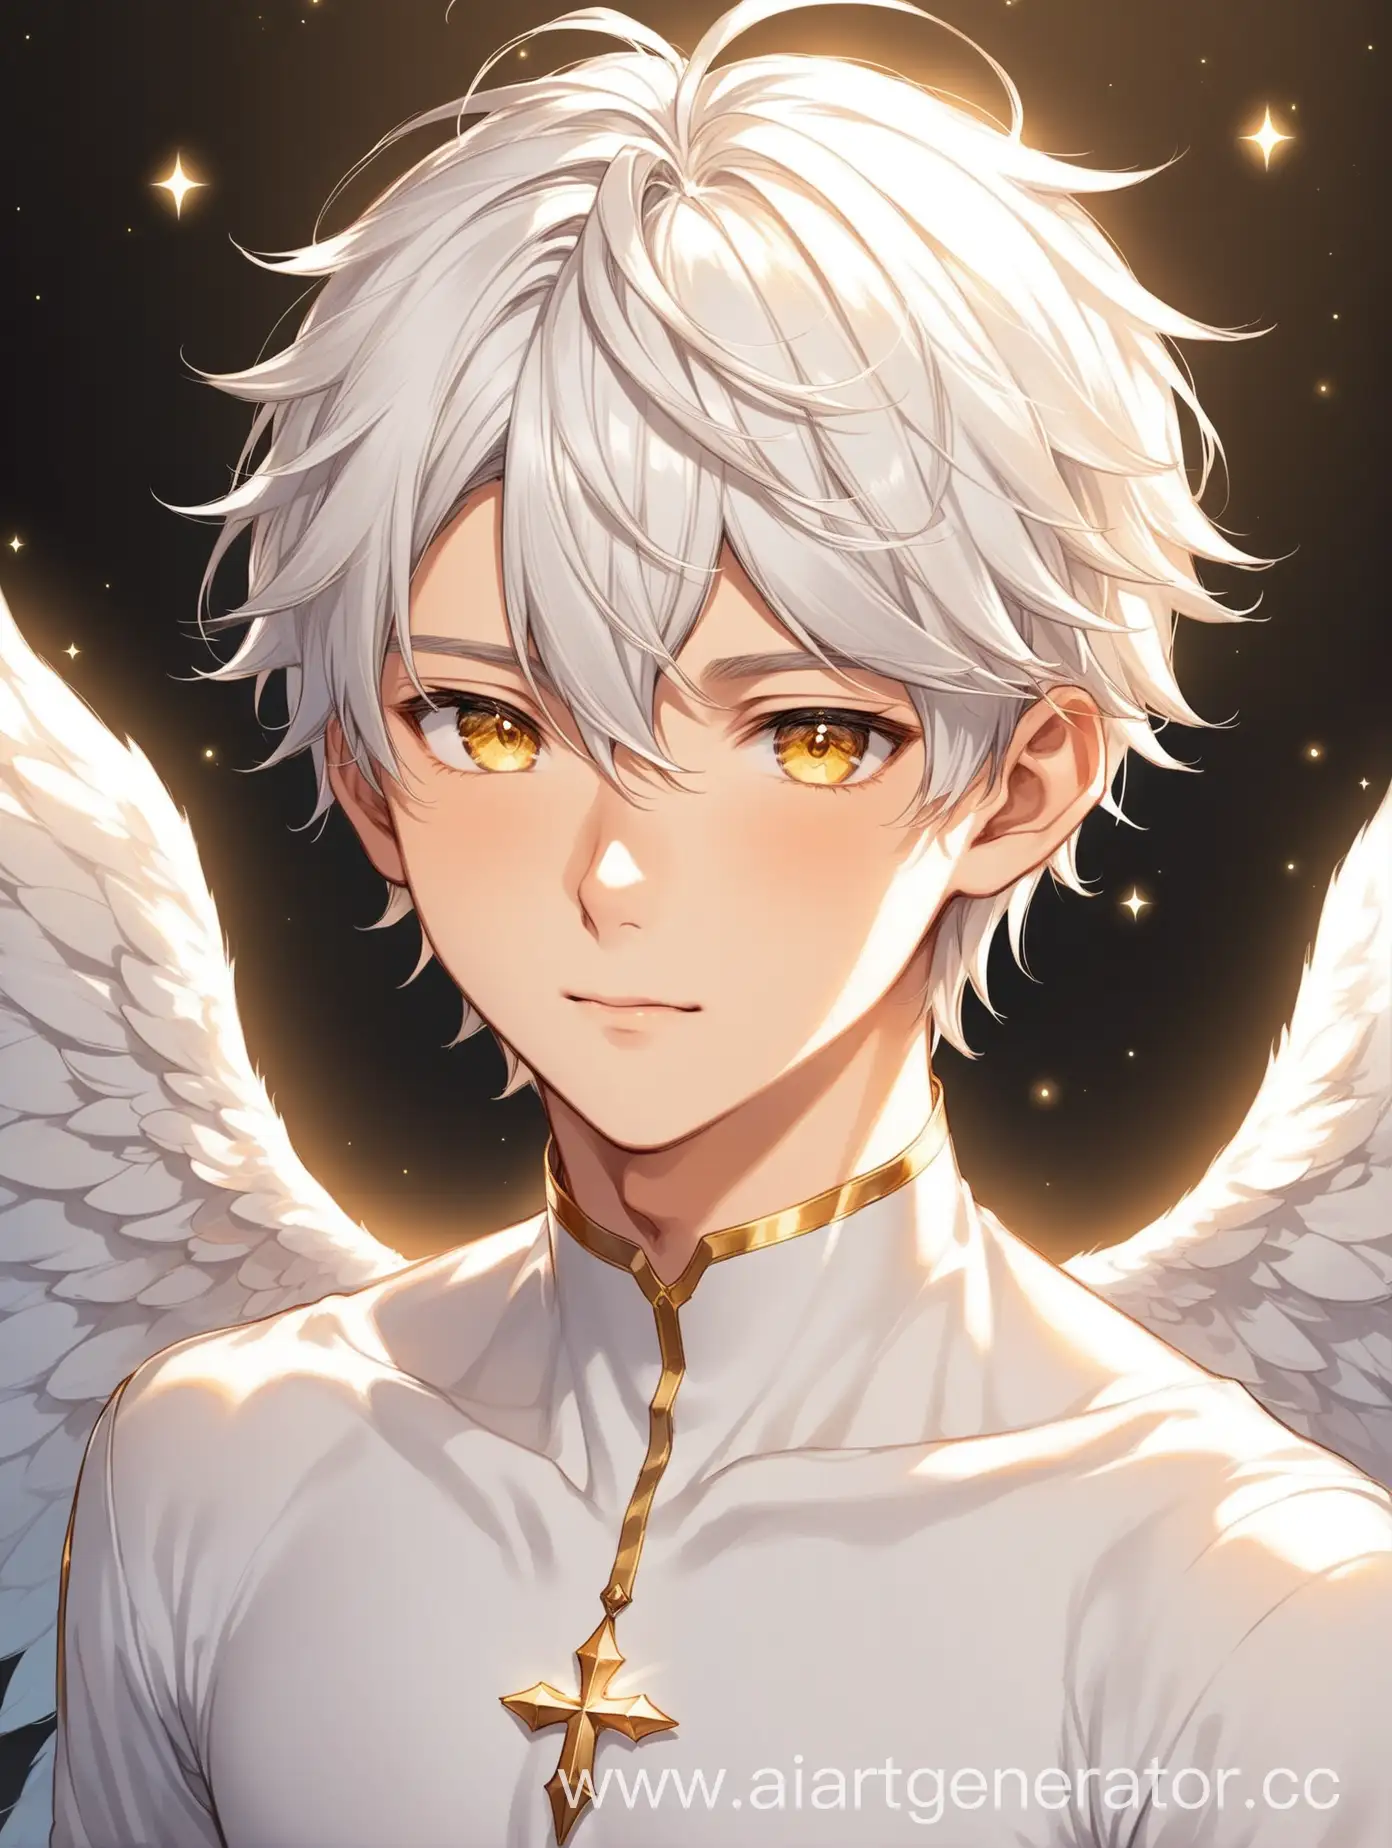 Graceful-Young-Man-with-White-Hair-and-Golden-Eyes-Angelic-Twink-Portrait